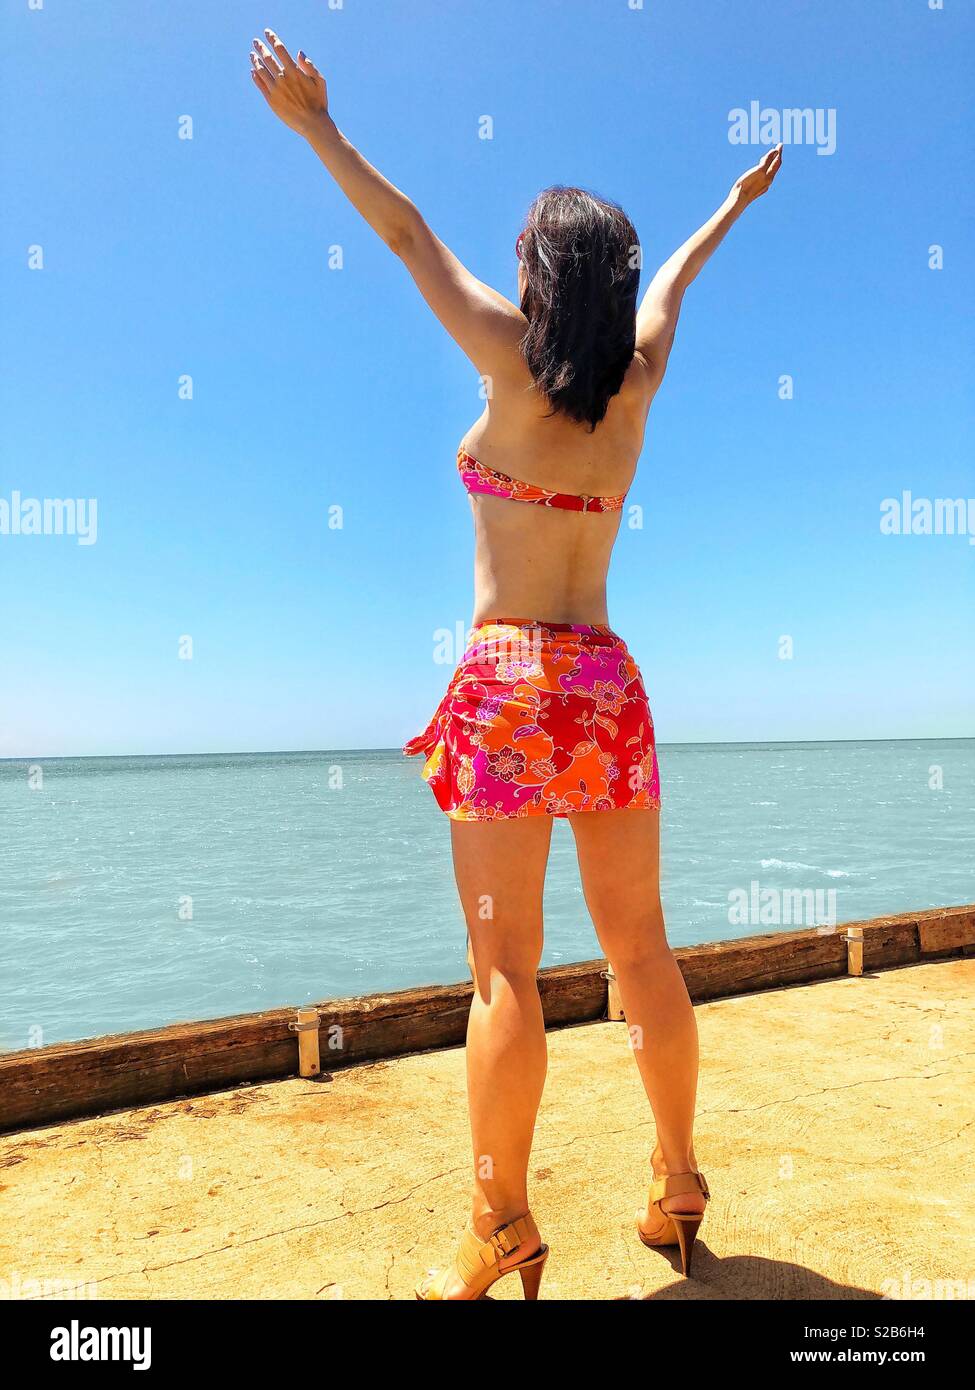 Young brunette woman in floral pink bikini and paleo skirt embraces the tropical Hawaiian island shore at the end of a pier on a bright sunny day in paradise Stock Photo